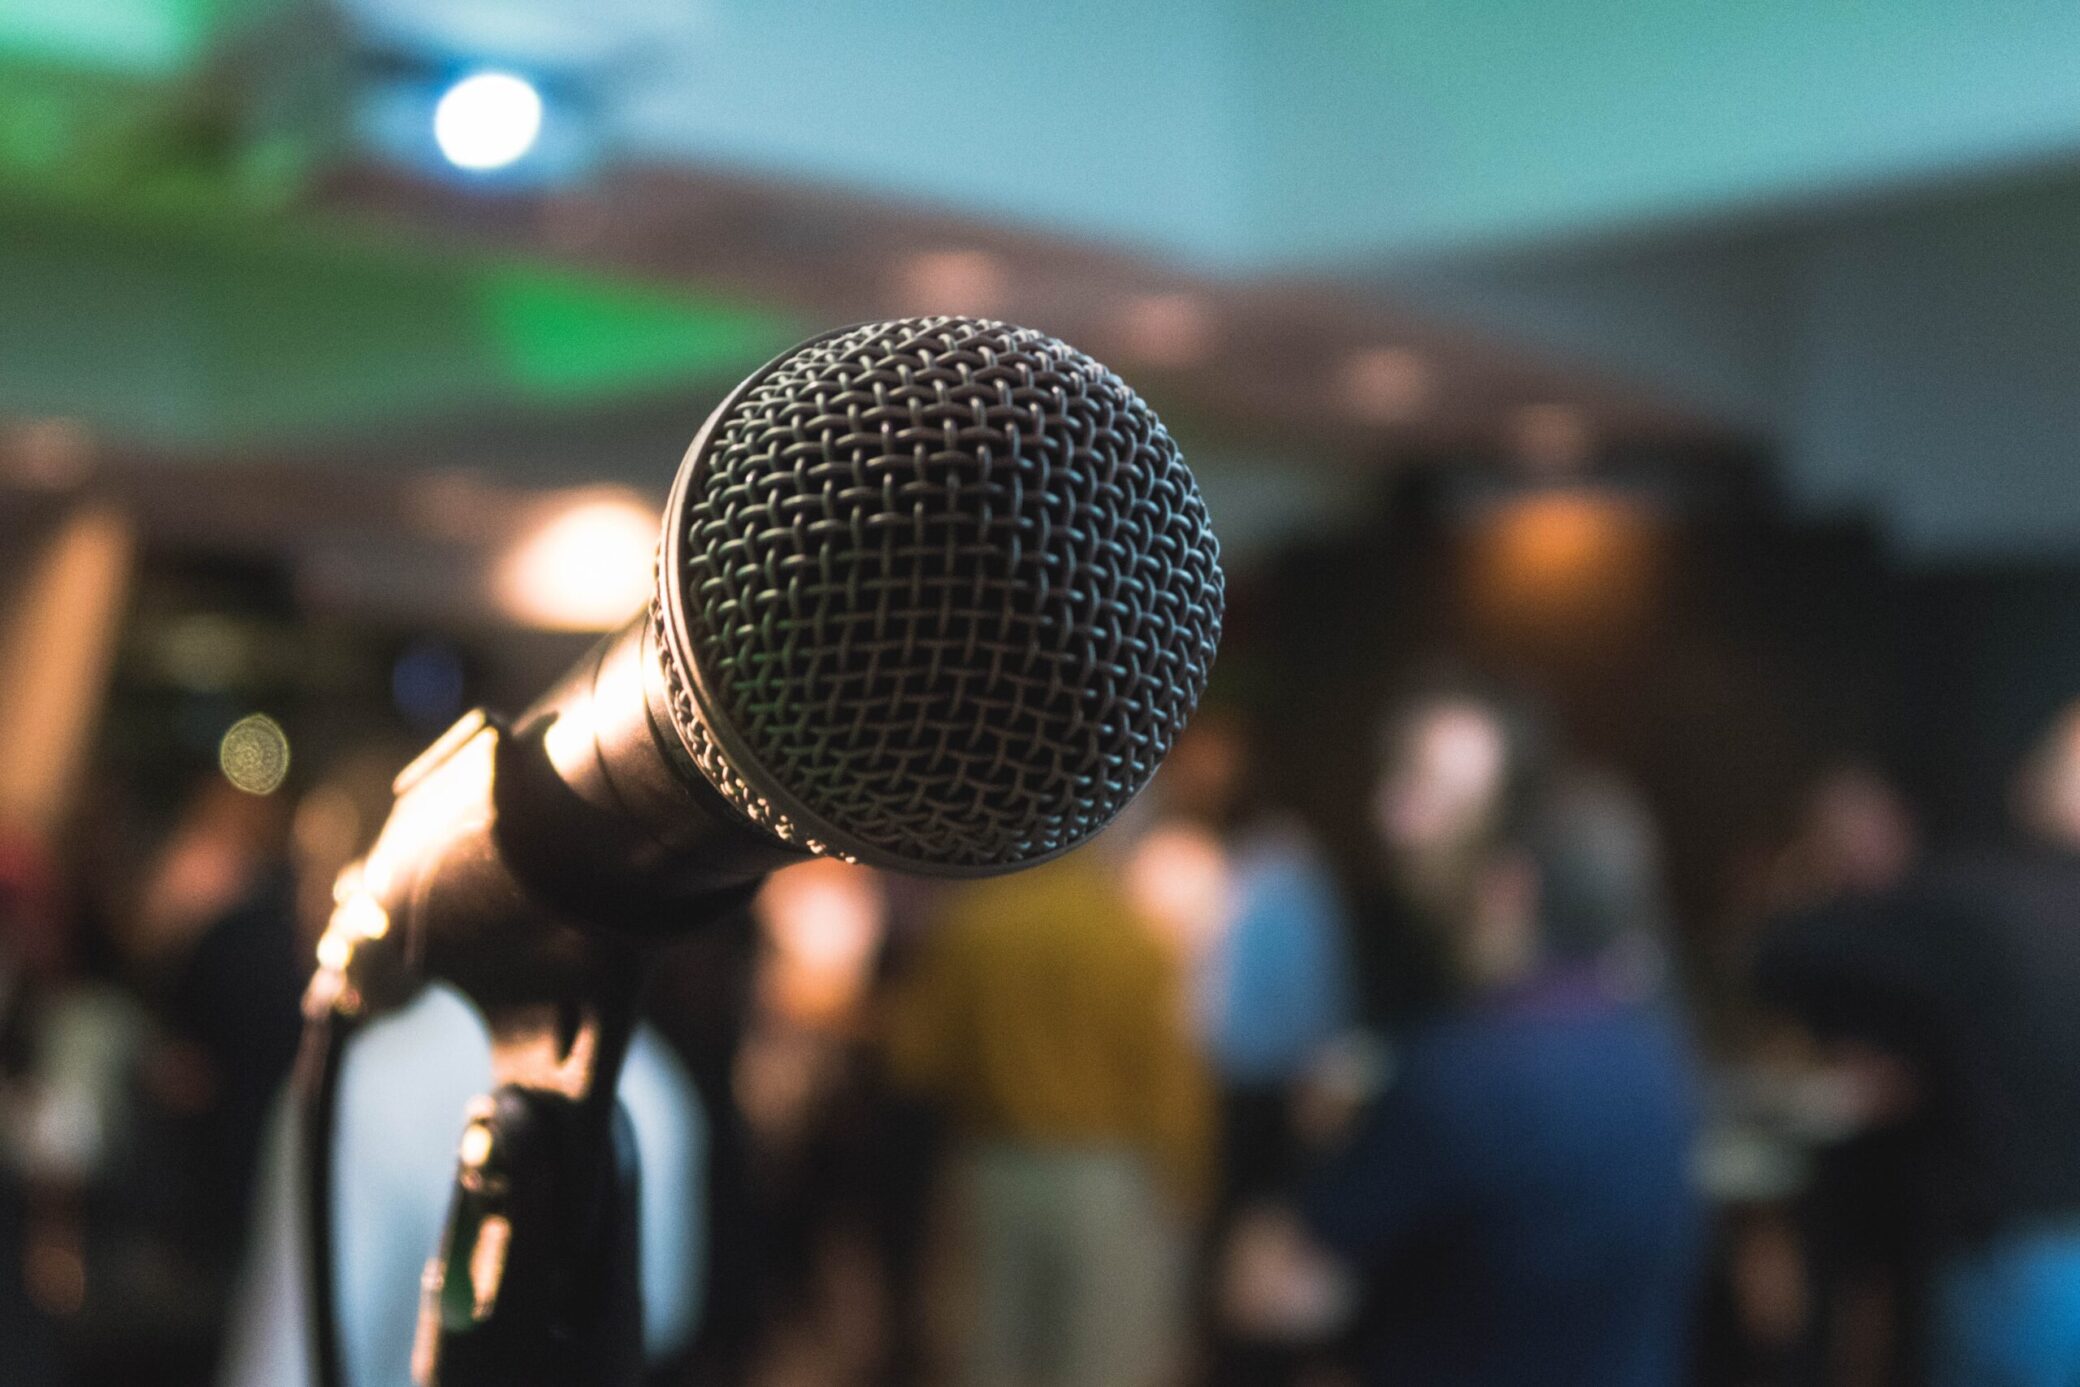 How do you find speakers that are a great match for an online event - is it different from in person?